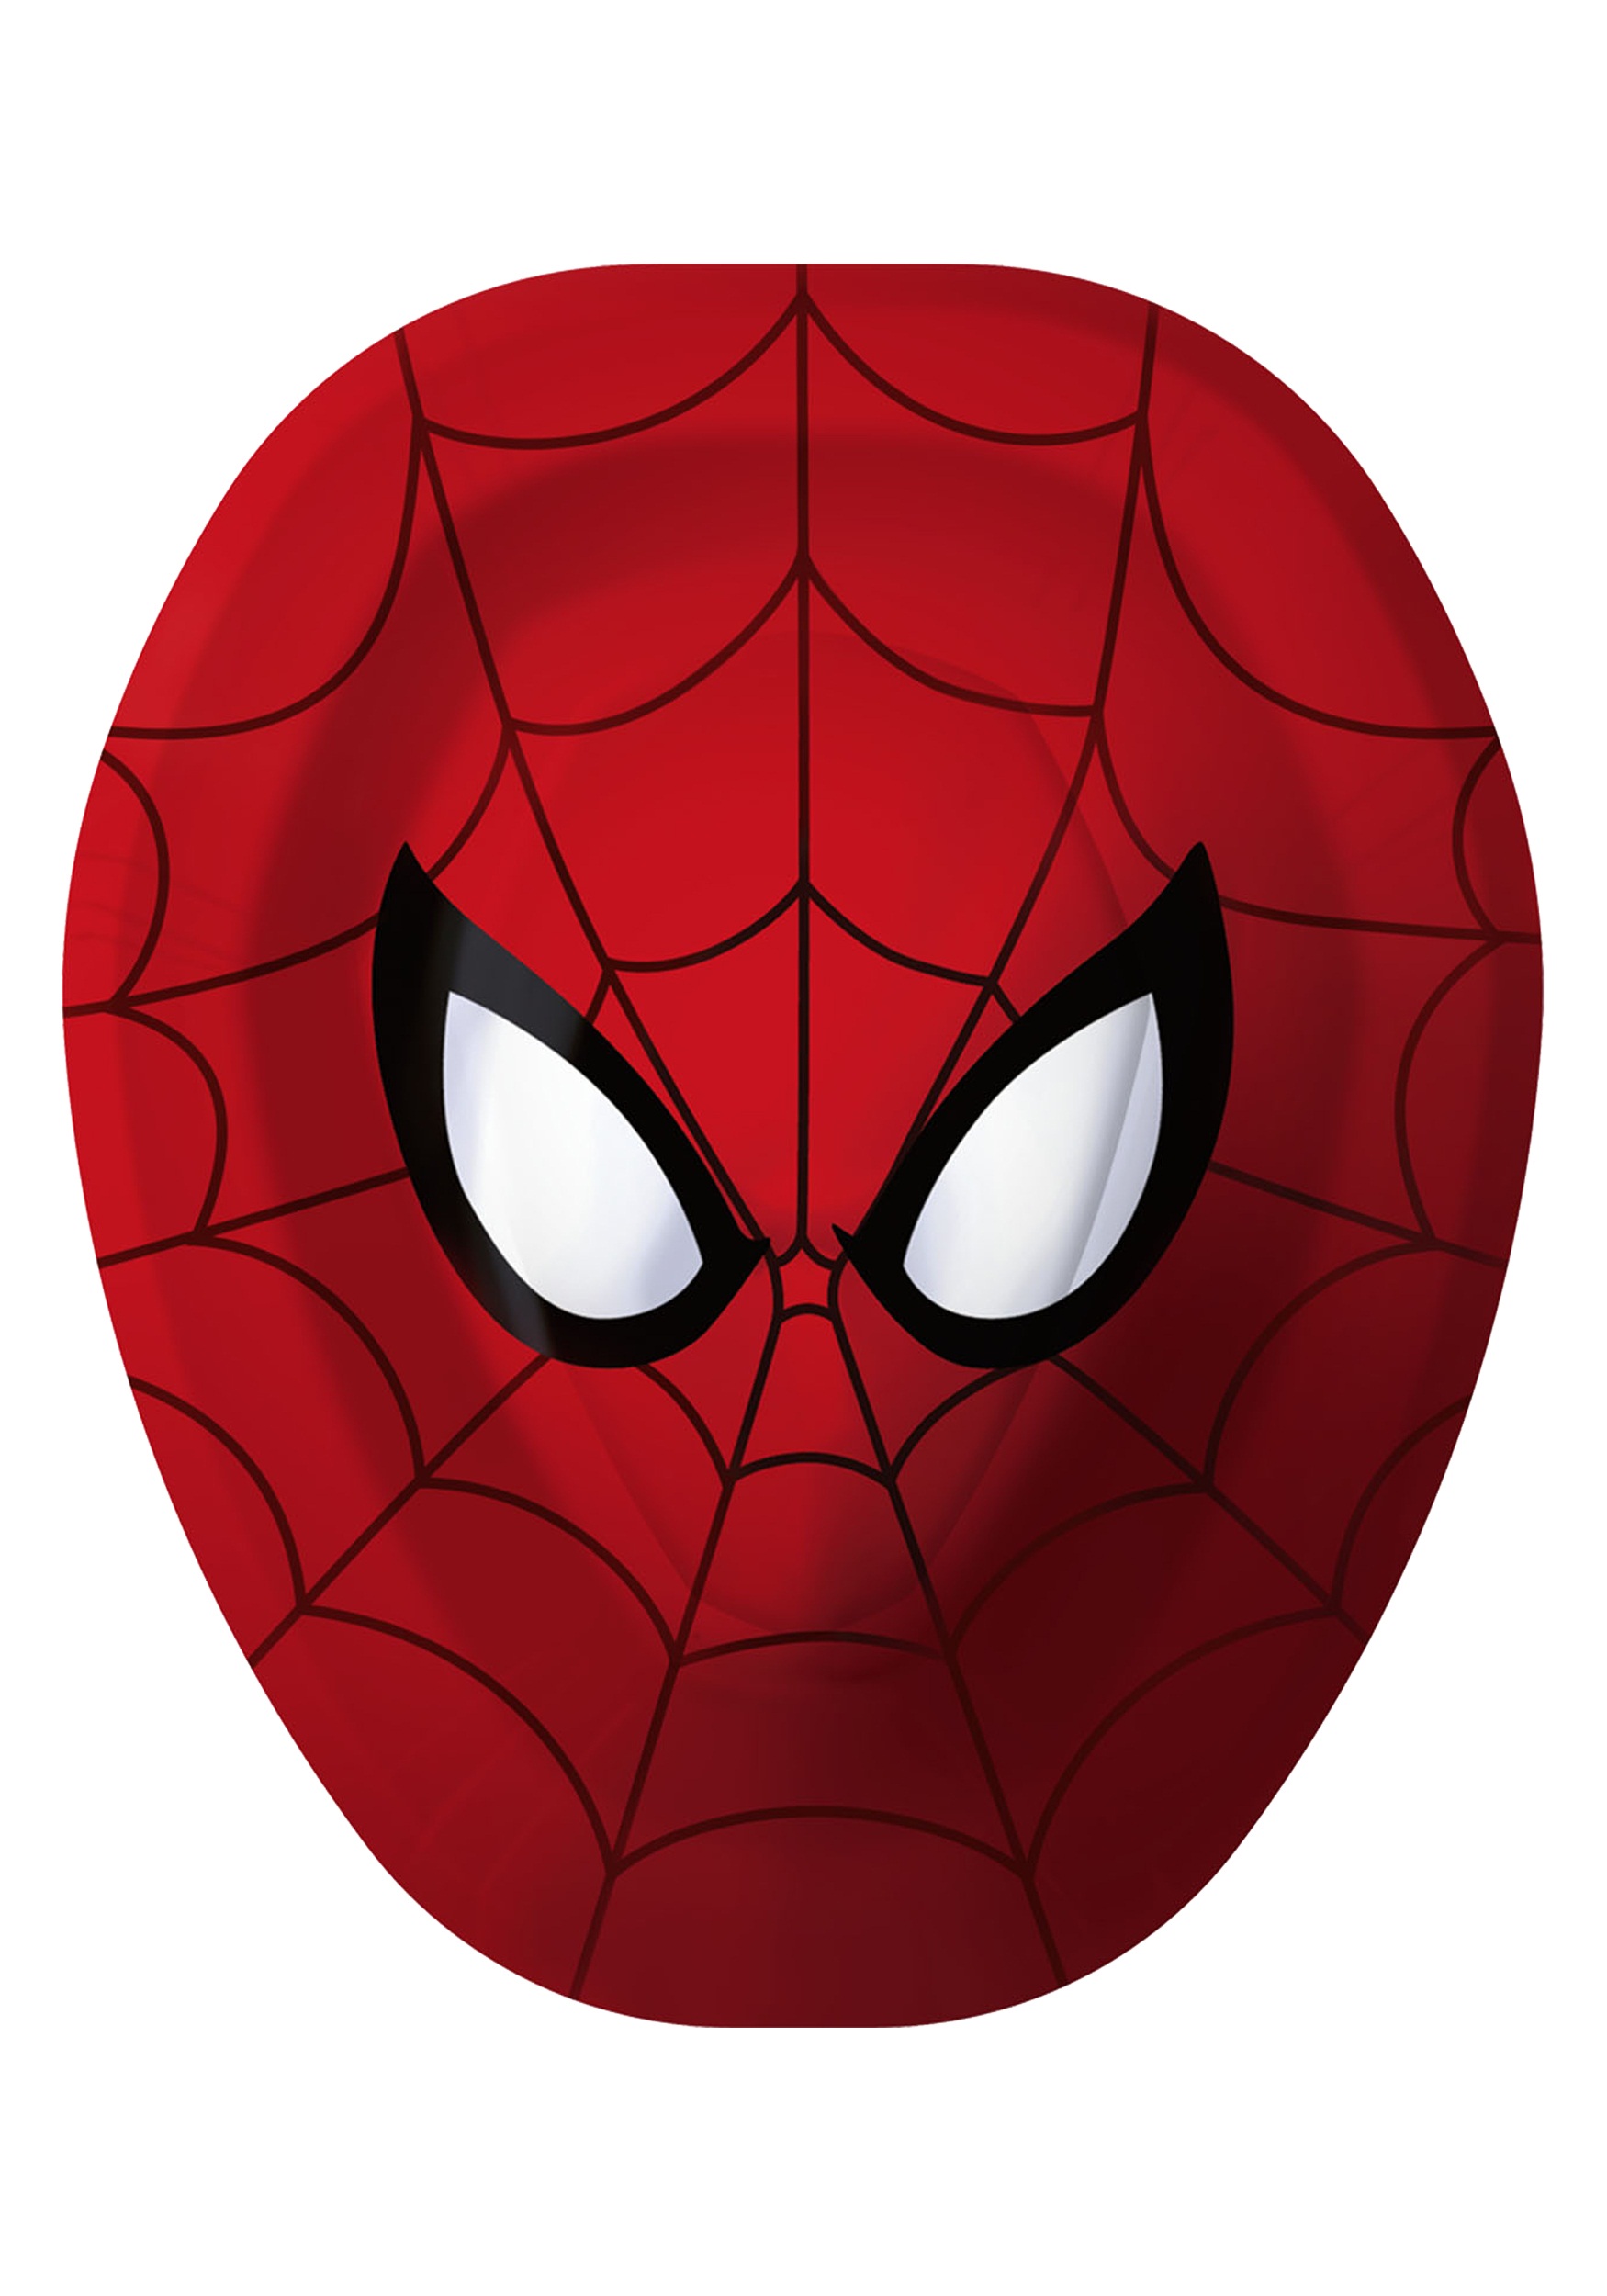 spiderman-face-images-7 - Folks Daily